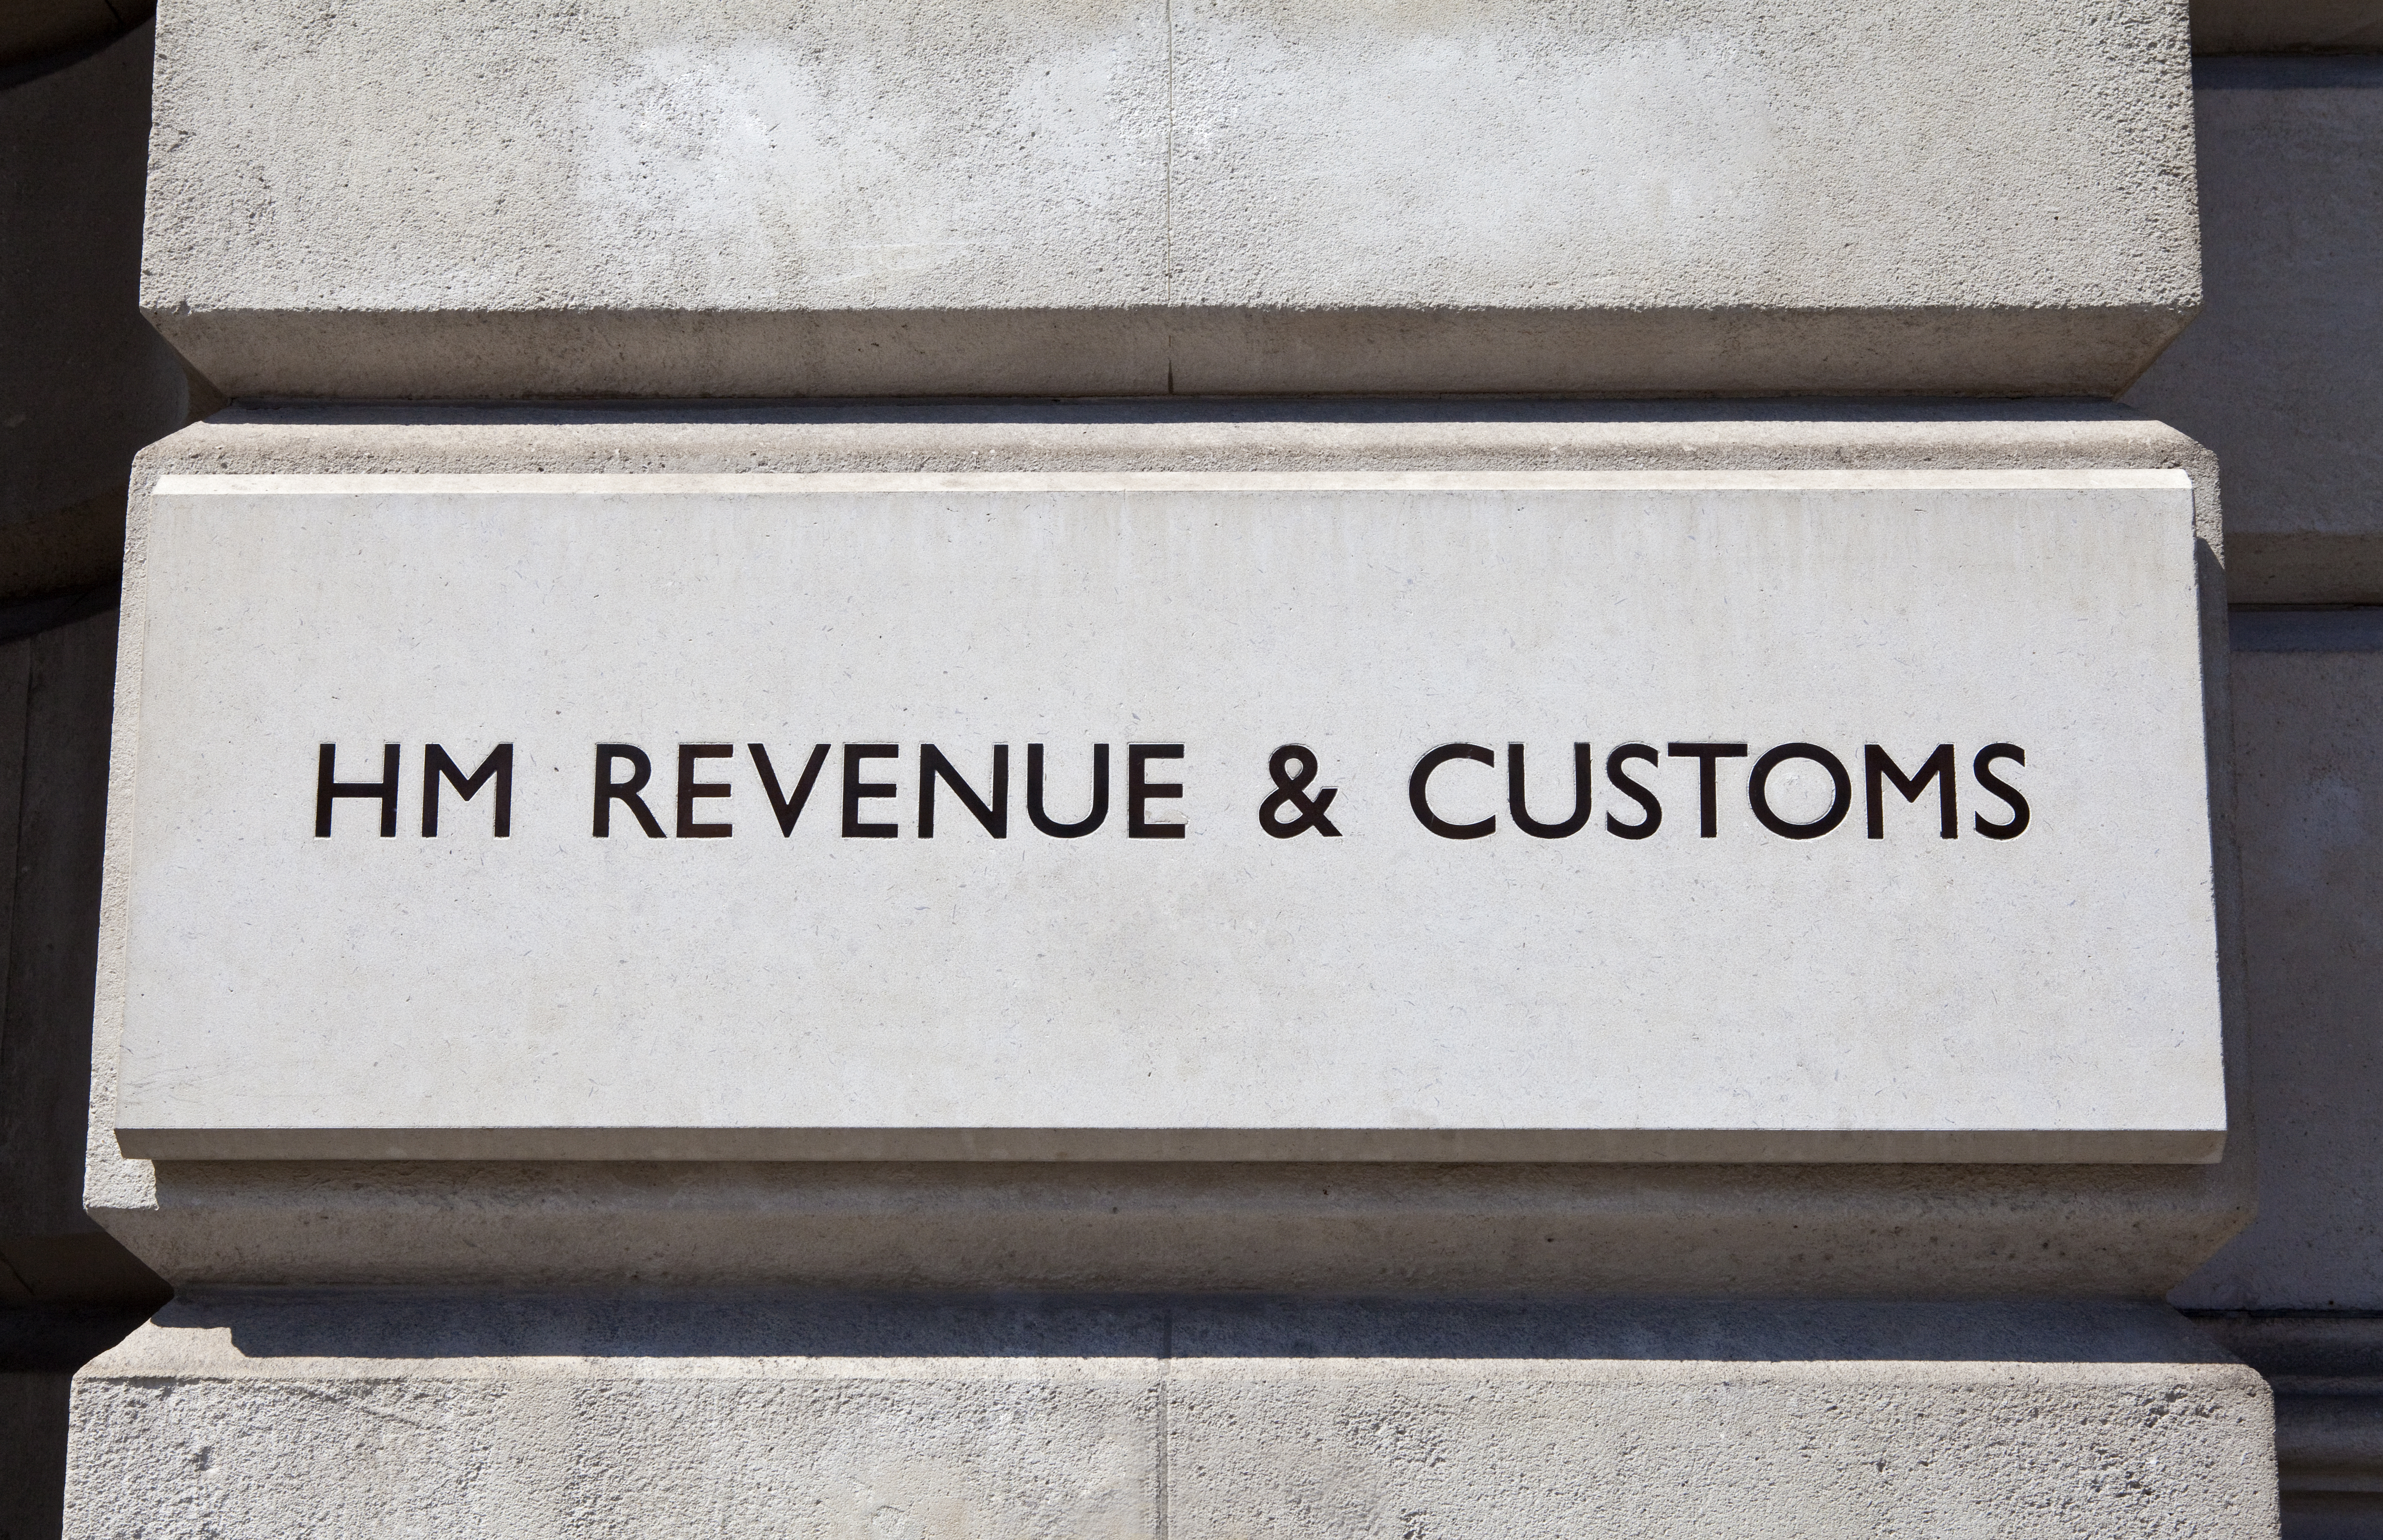 HMRC: Resi transactions drop 52% month-on-month